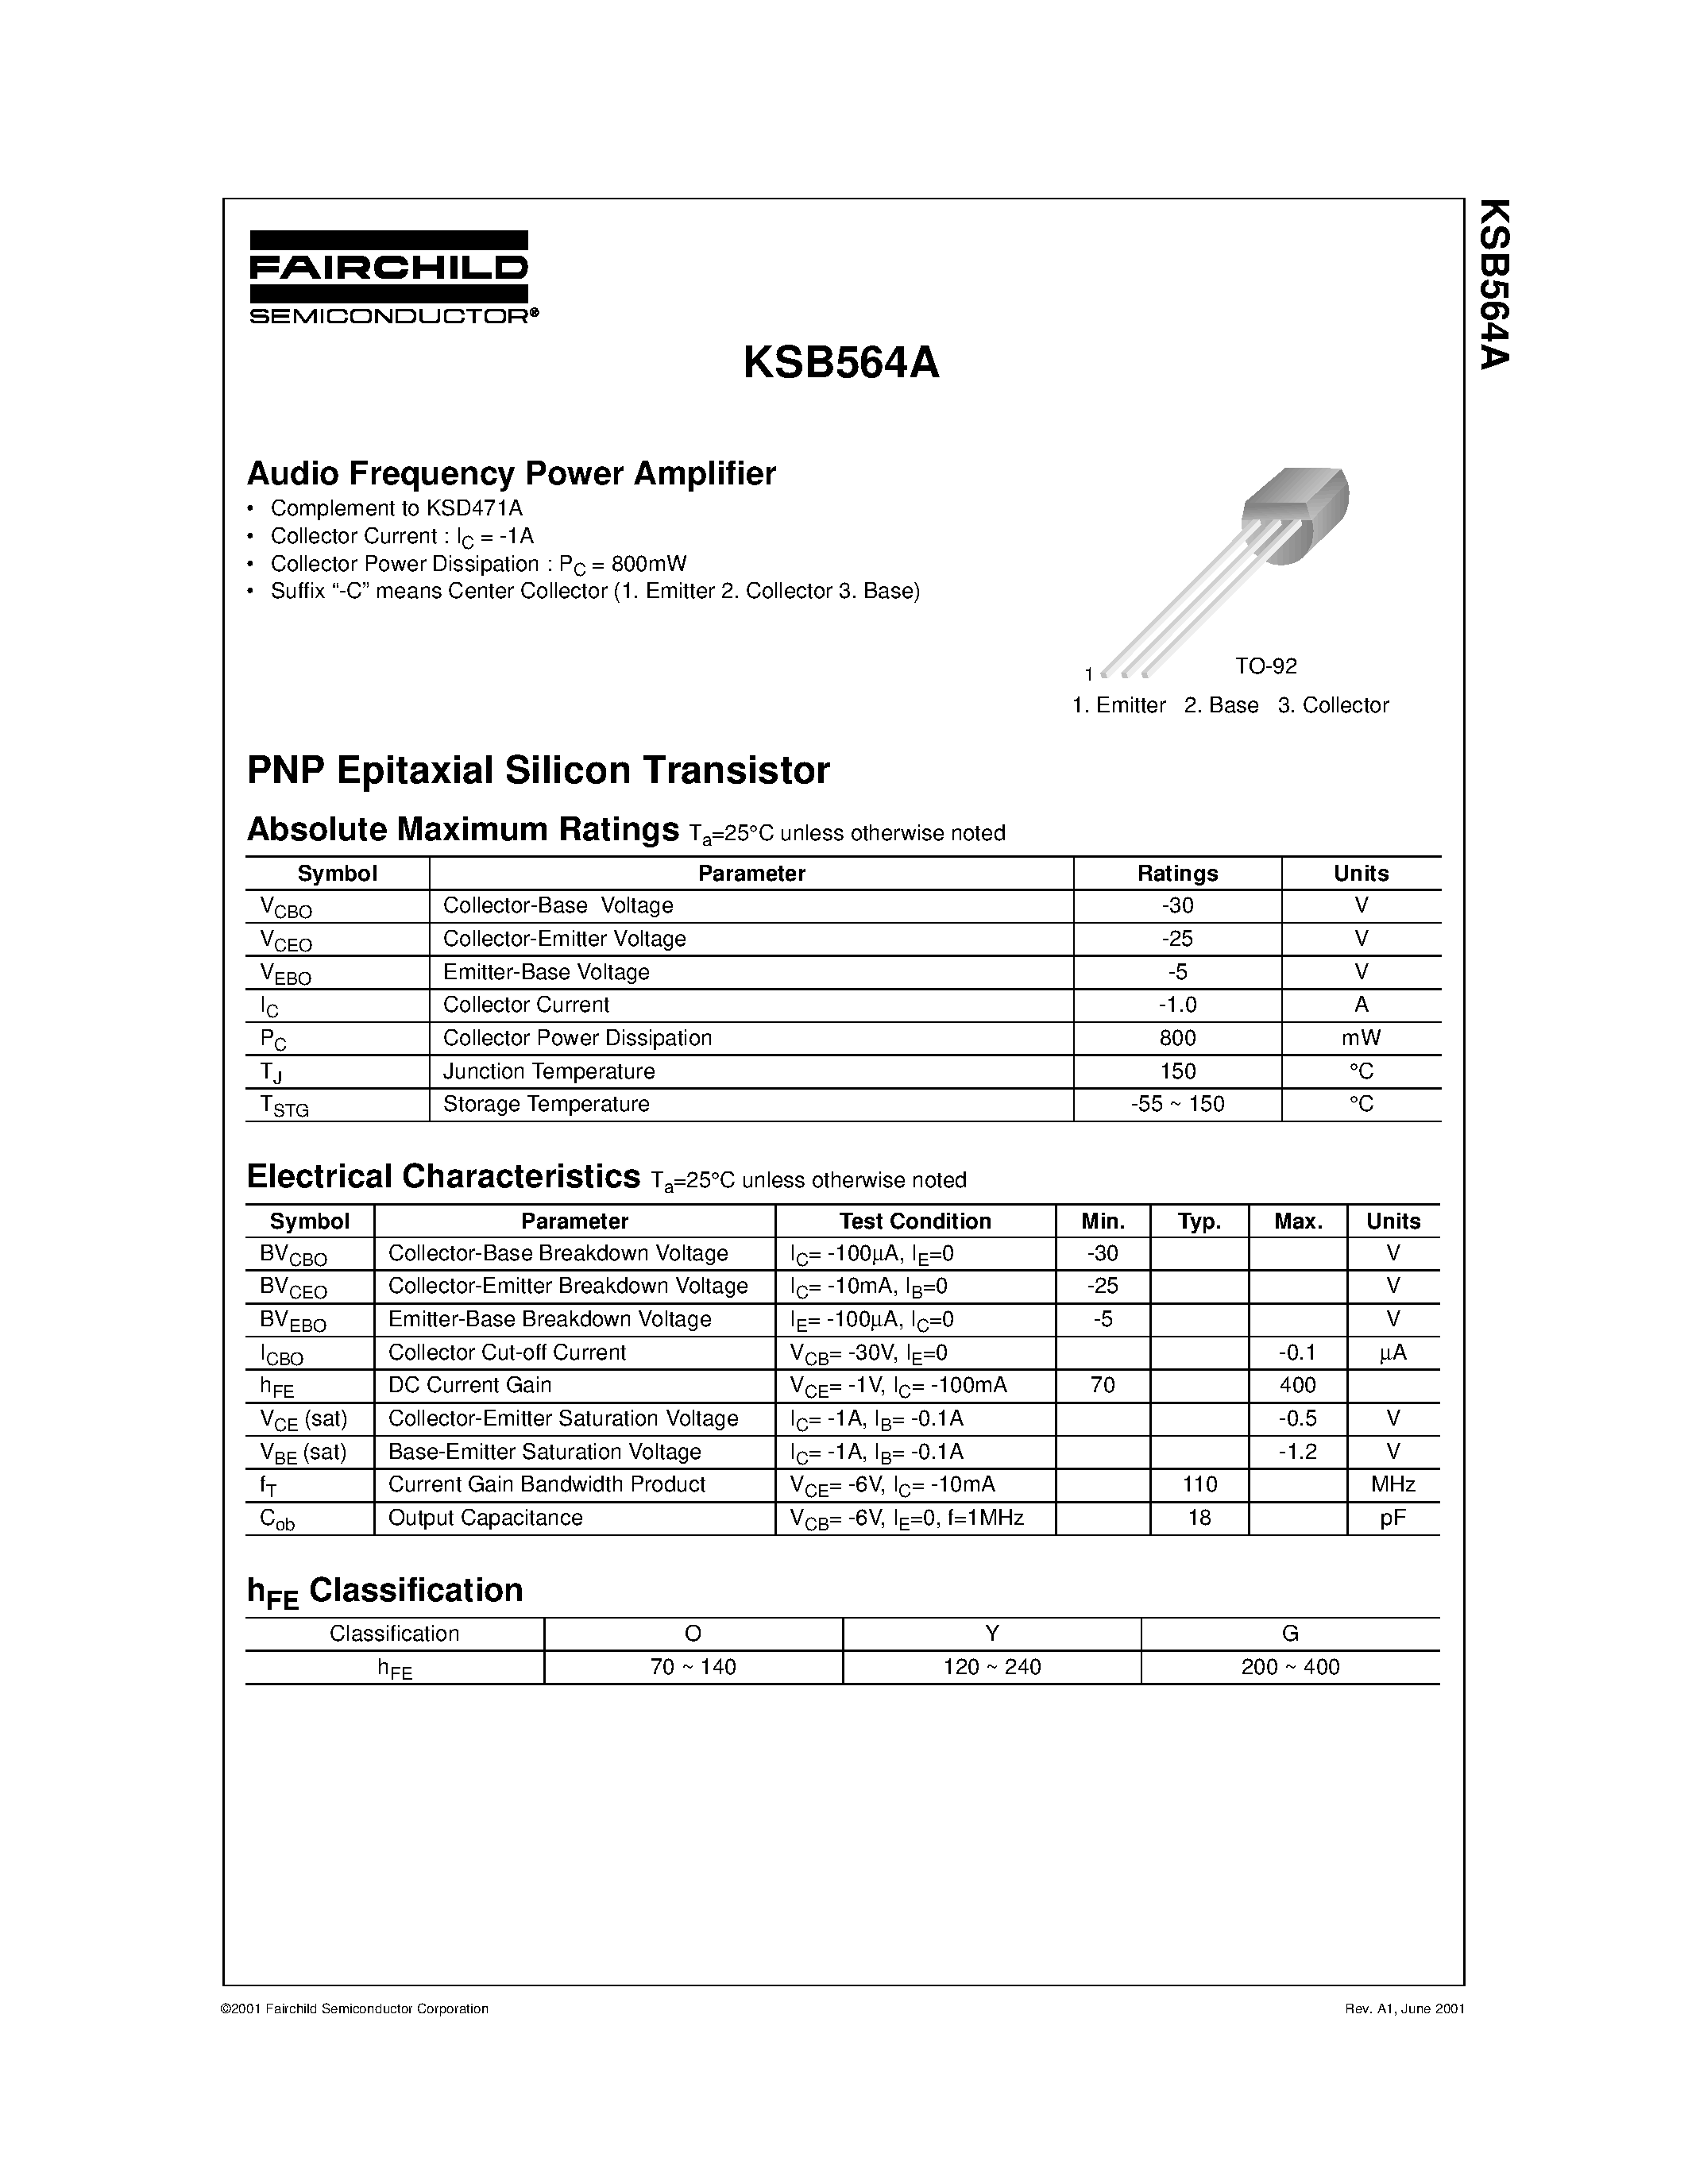 Datasheet KSB564A - Audio Frequency Power Amplifier page 1